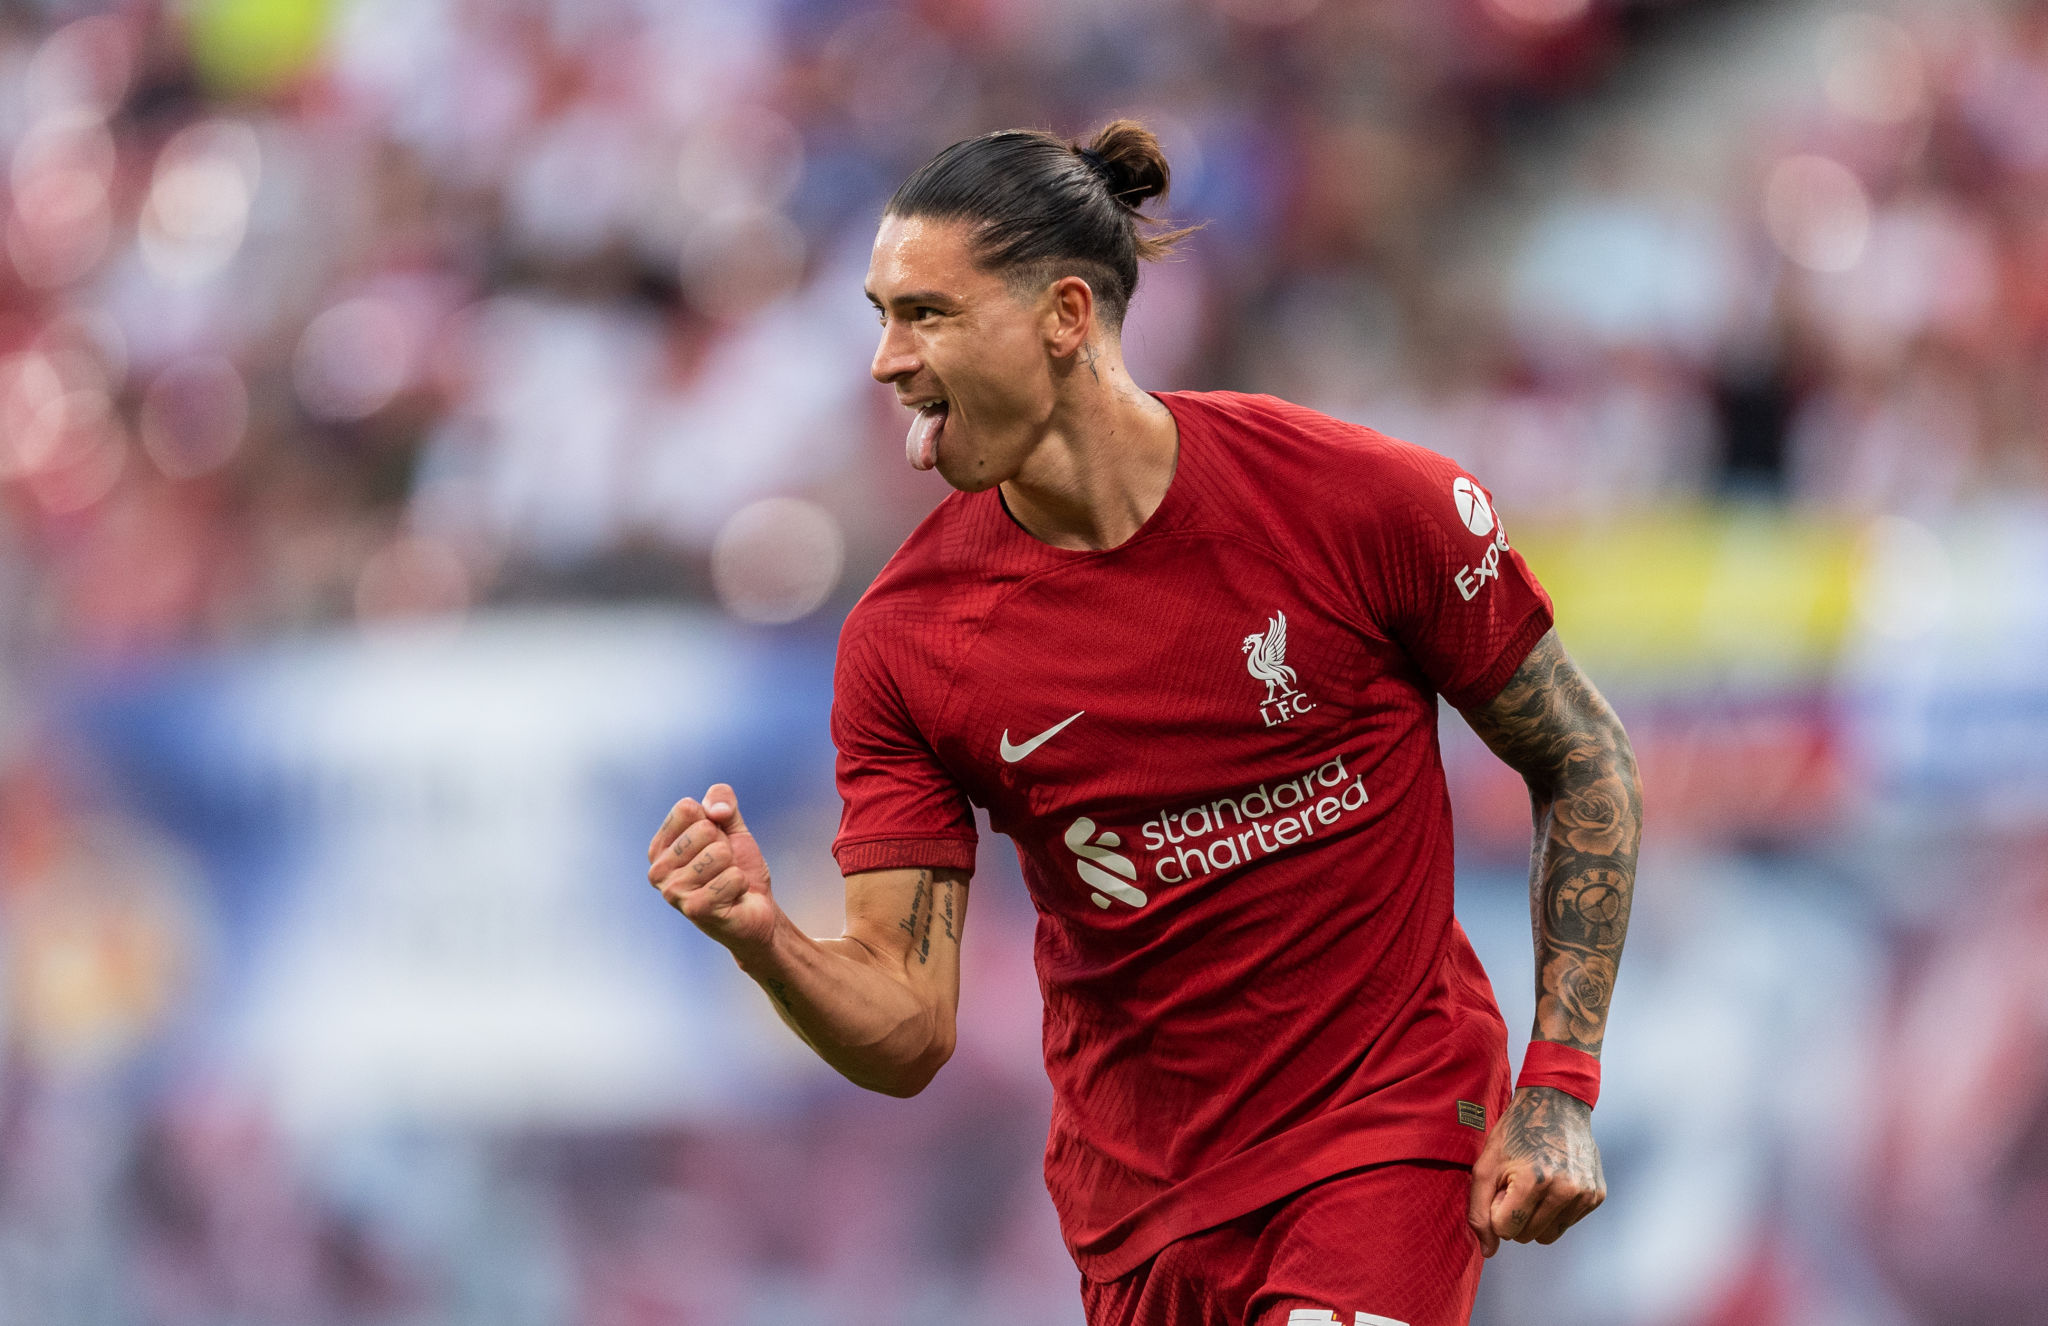 RB Leipzig vs Liverpool LIVE: FIVE STAR LIVERPOOL, Darwin Nunez scores FOUR goals as the Reds thrash Leipzig 5-0 at the Red Bull Arena, Check Liverpool beat RB Leipzig HIGHLIGHTS